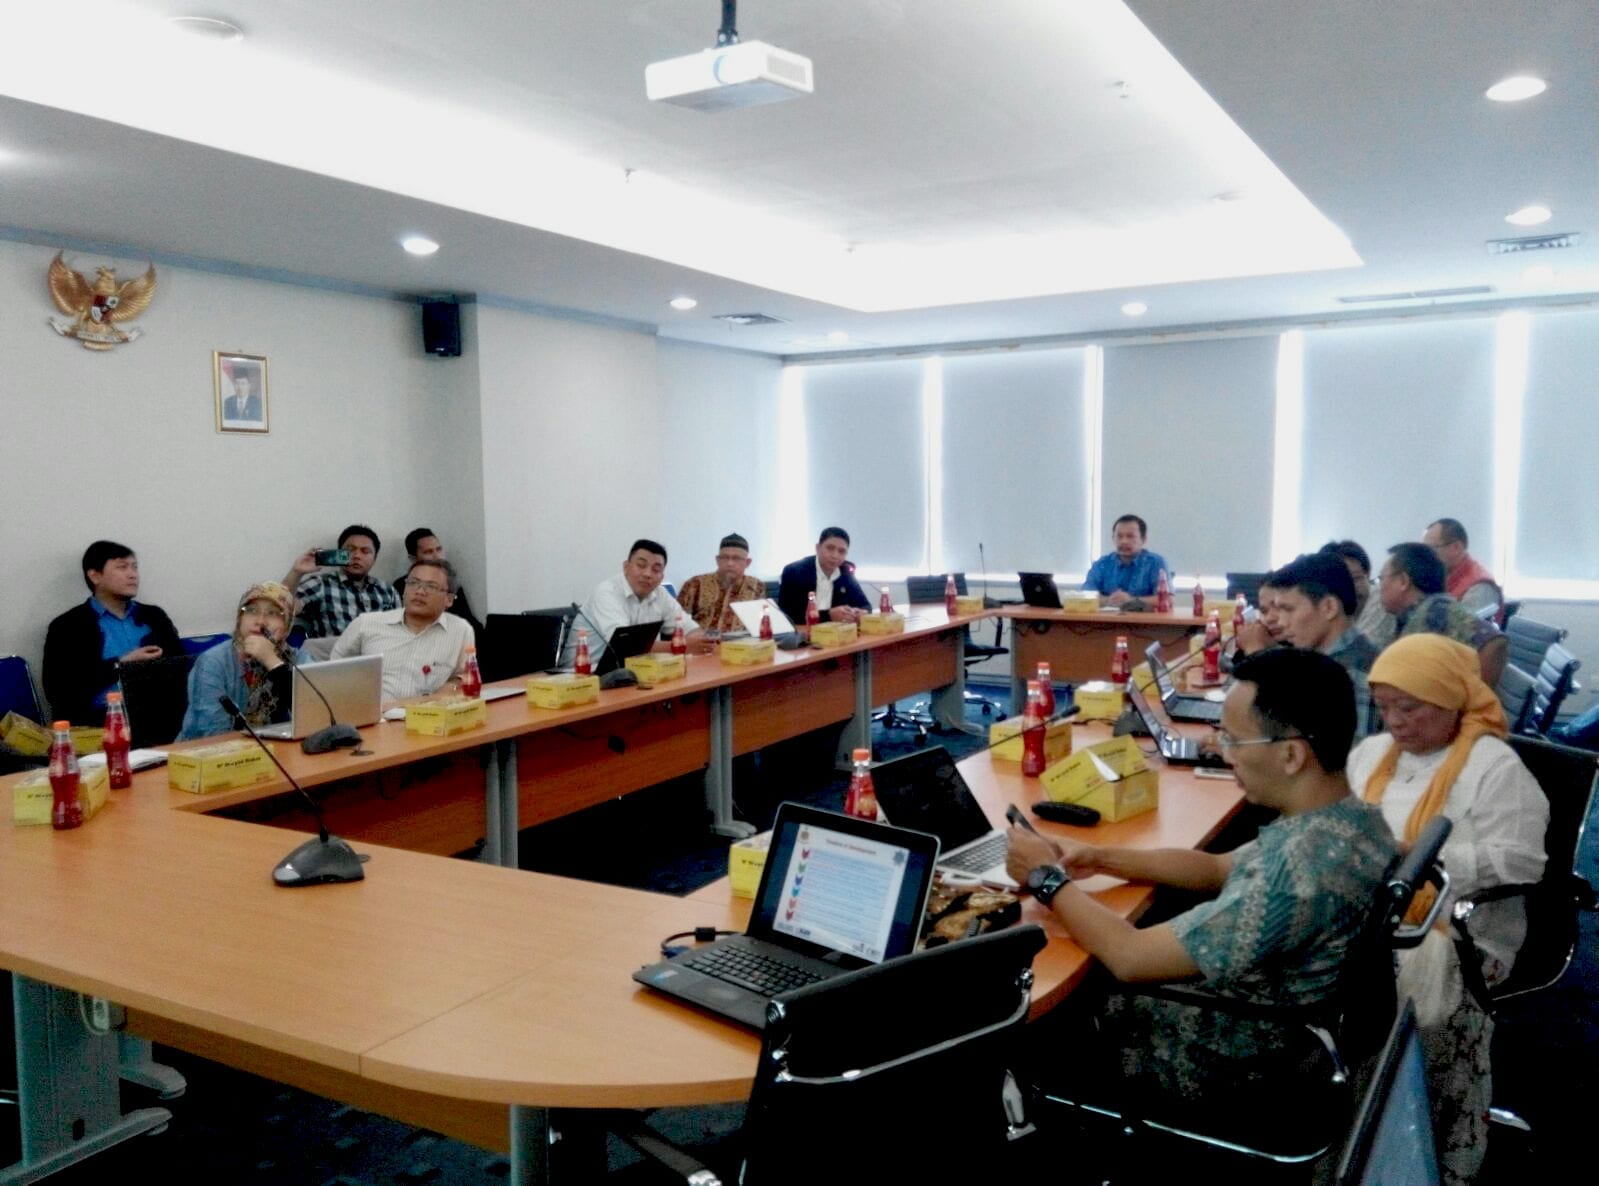 Gallery of School of Computing Sharing Curriculum About Digital Forensics at the Ministry of Communication and Information with National Police Headquarters, Gunadarma, and UII